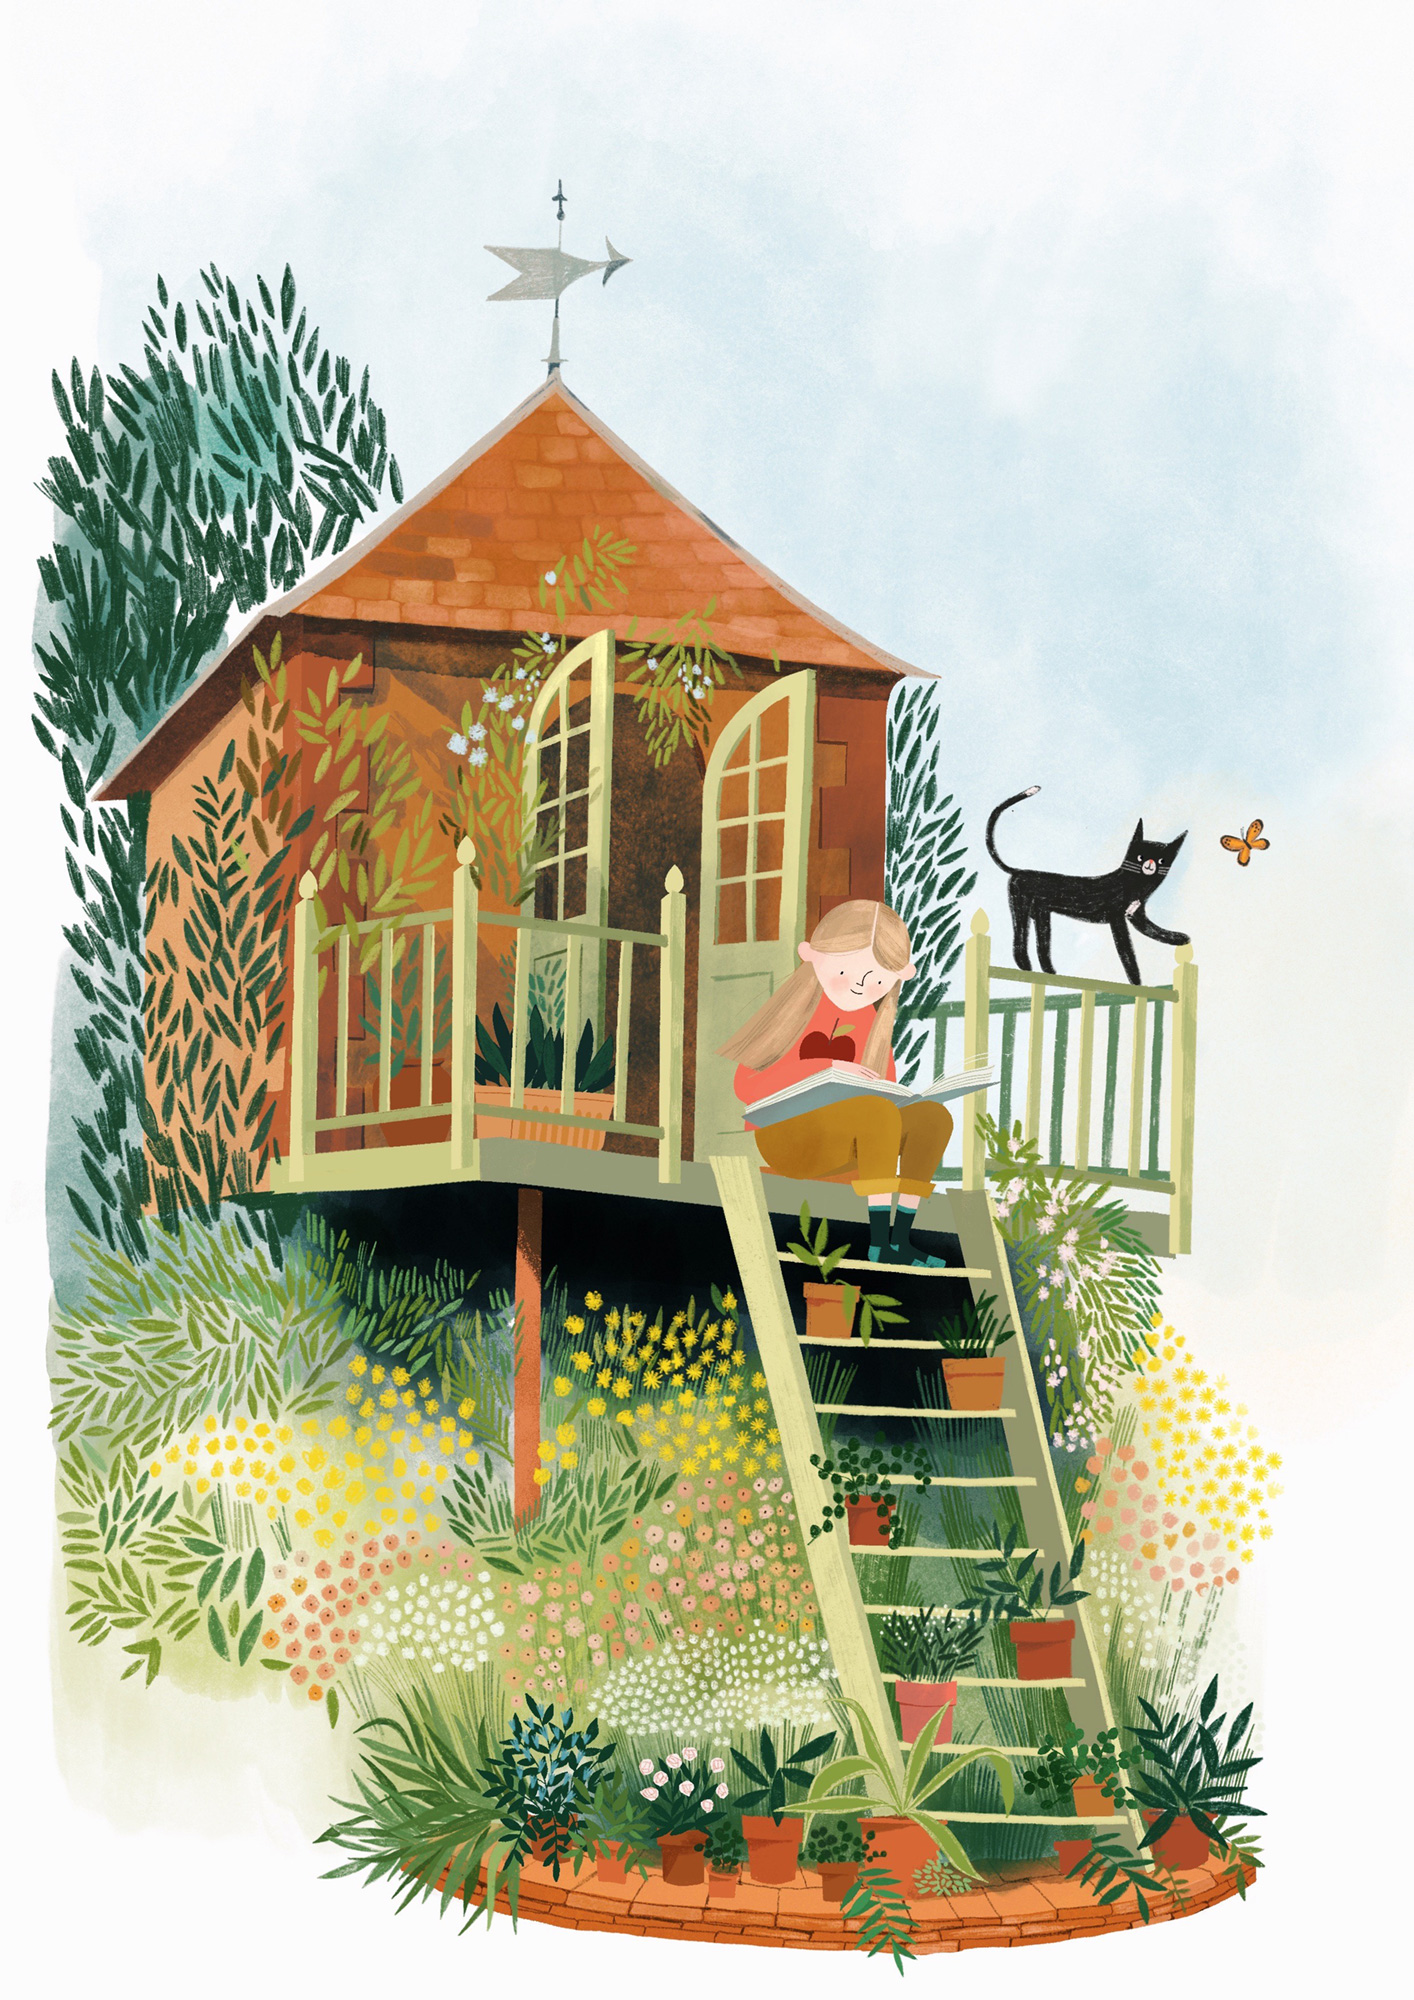 Illustration of a tree house